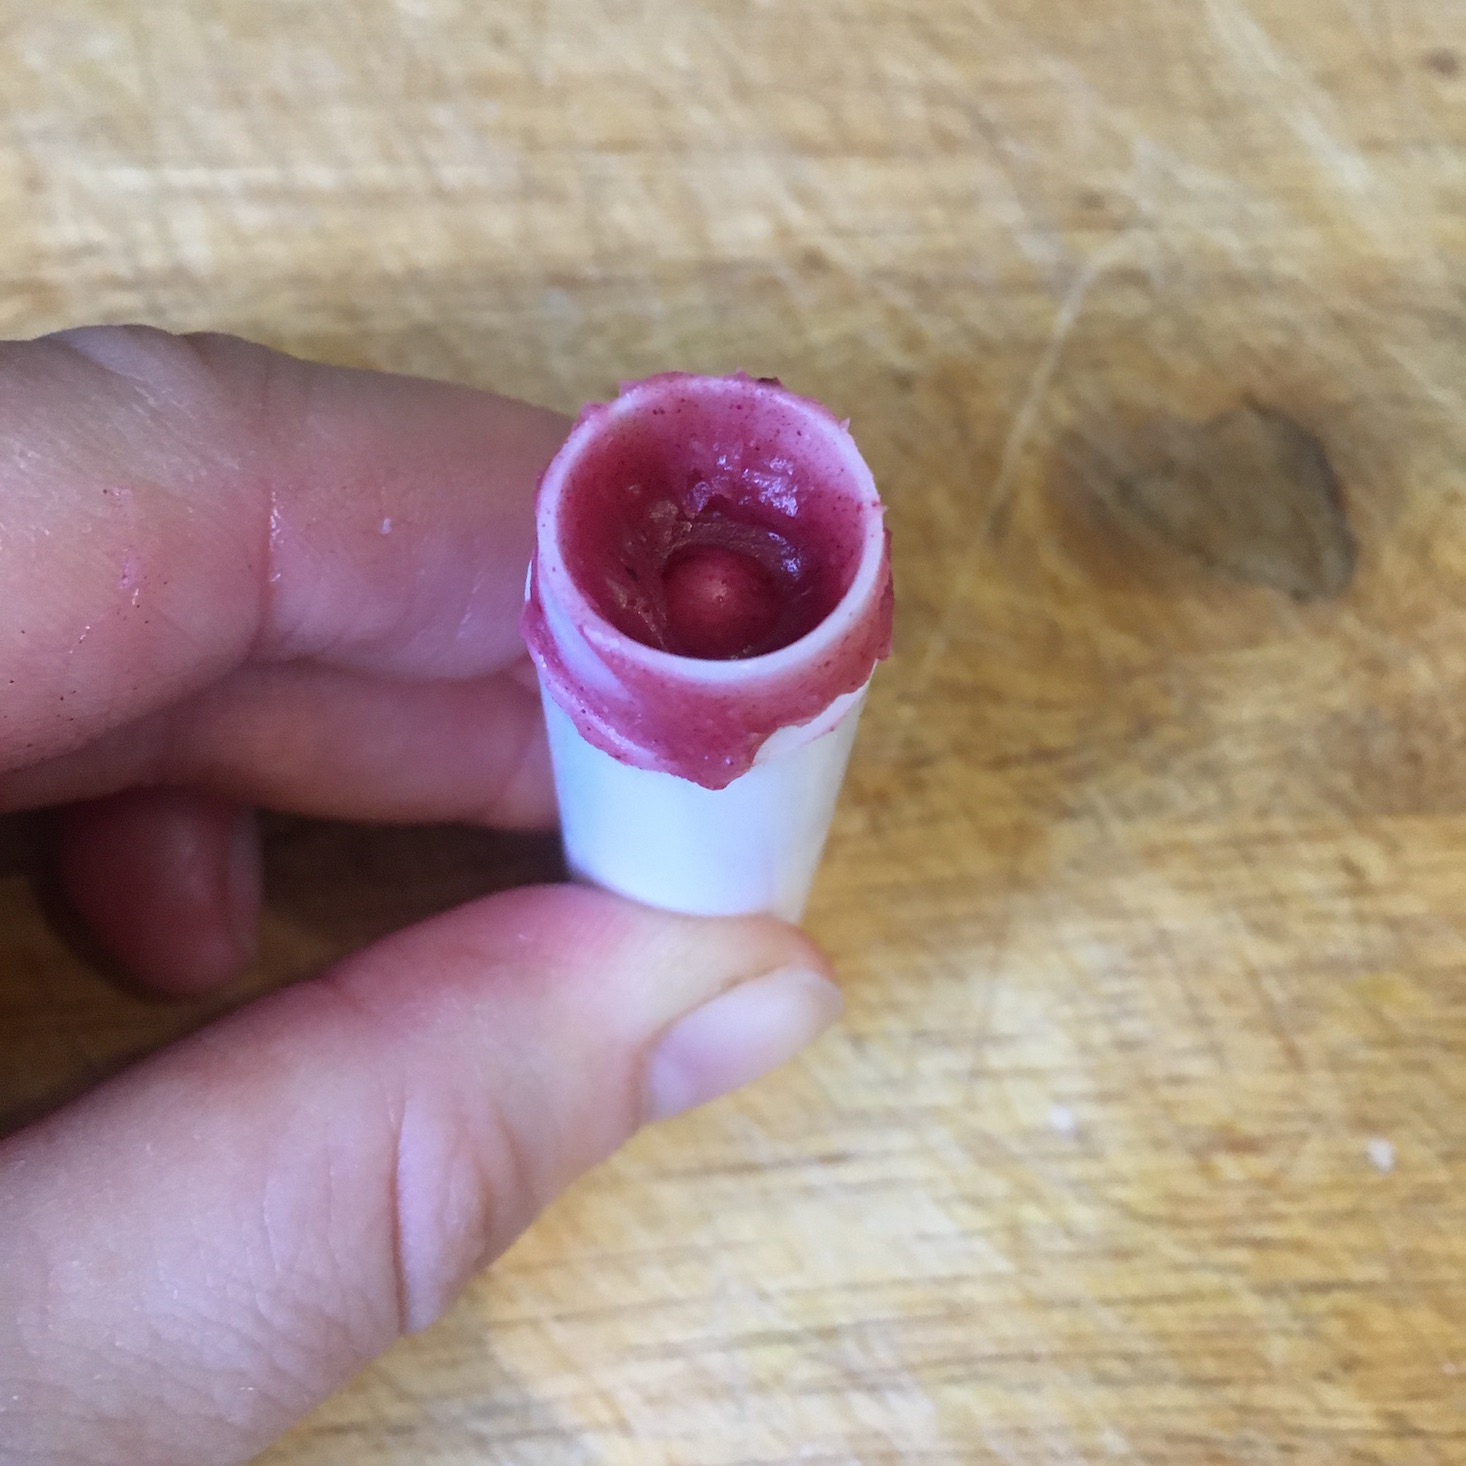 Tapping the container to help the lip balm reach the bottom.